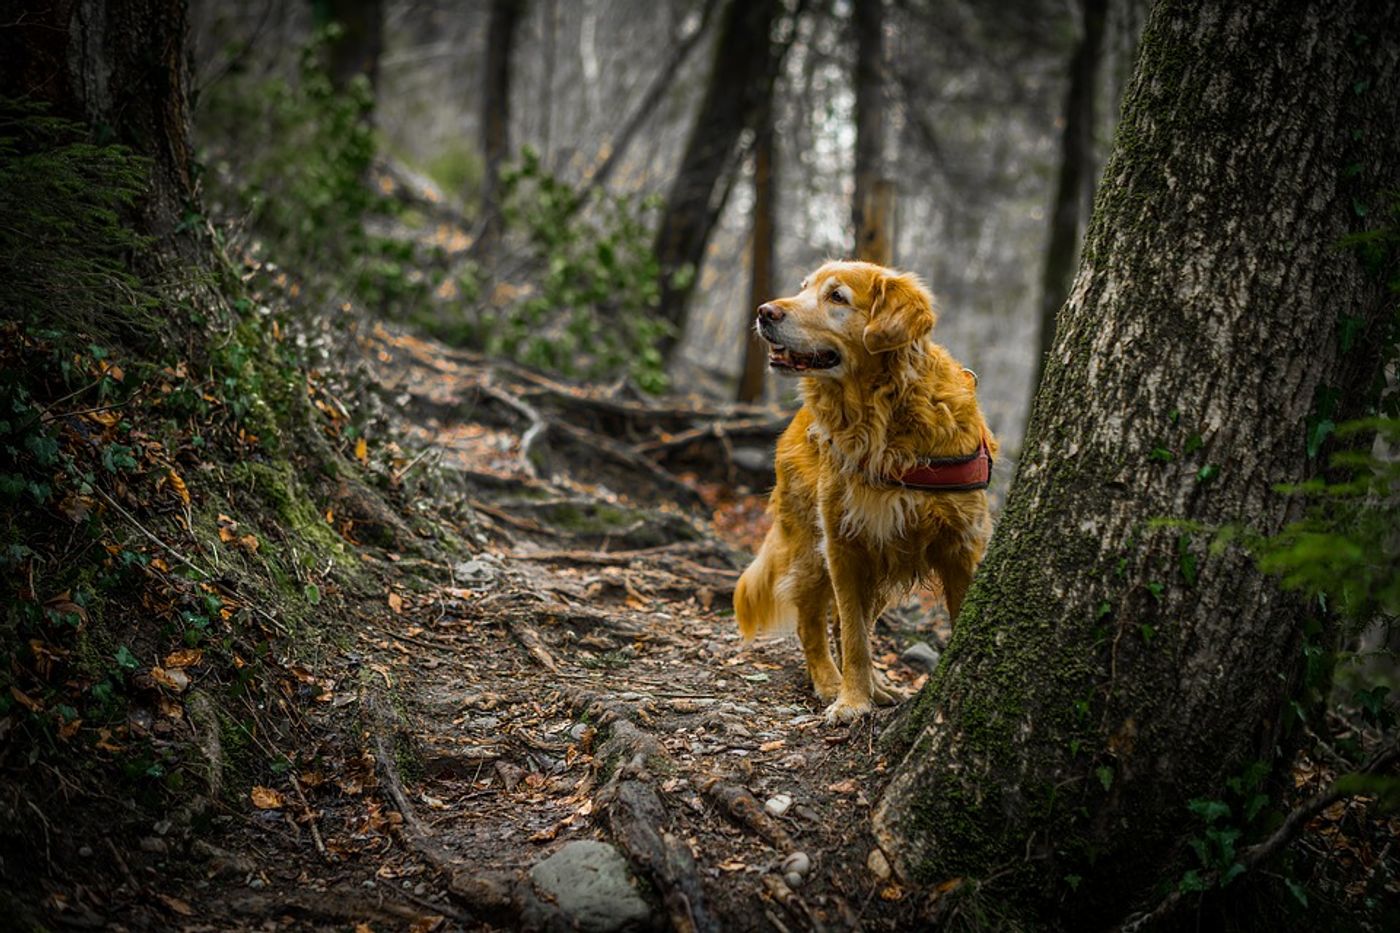 A dog allowed to roam the wilderness freely can be bad for animals that live there.